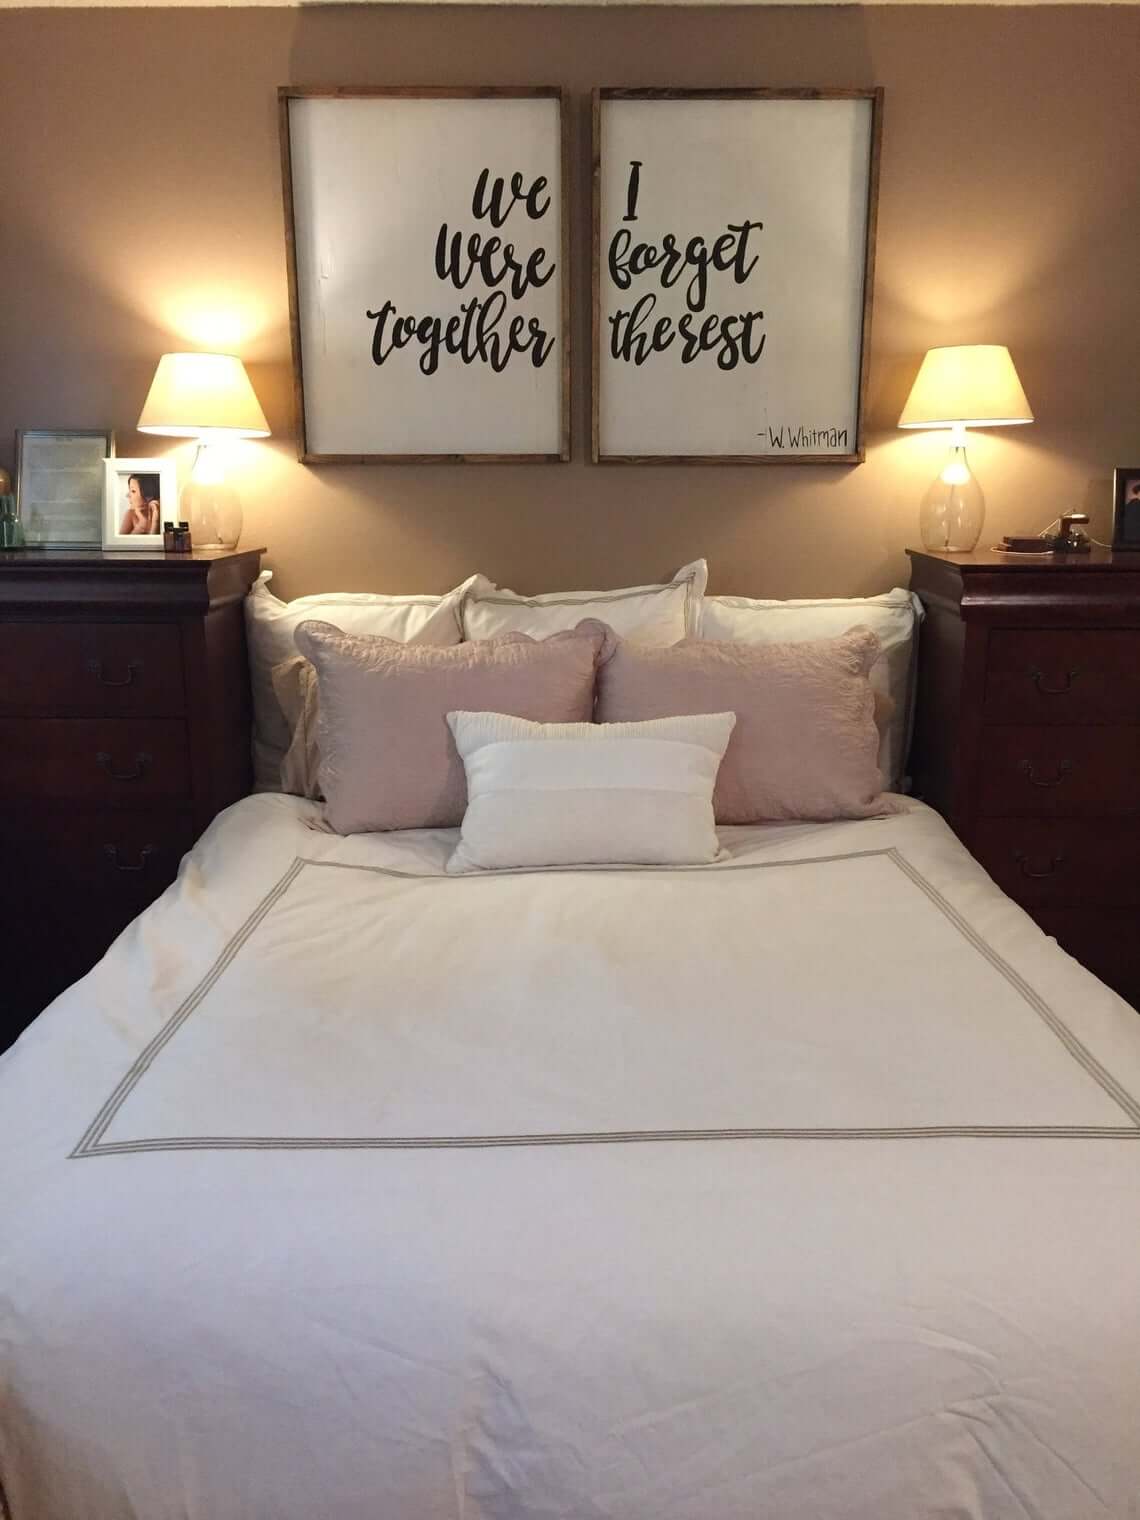 Married Bedroom Decorating Ideas For Couples - canvas-nexus